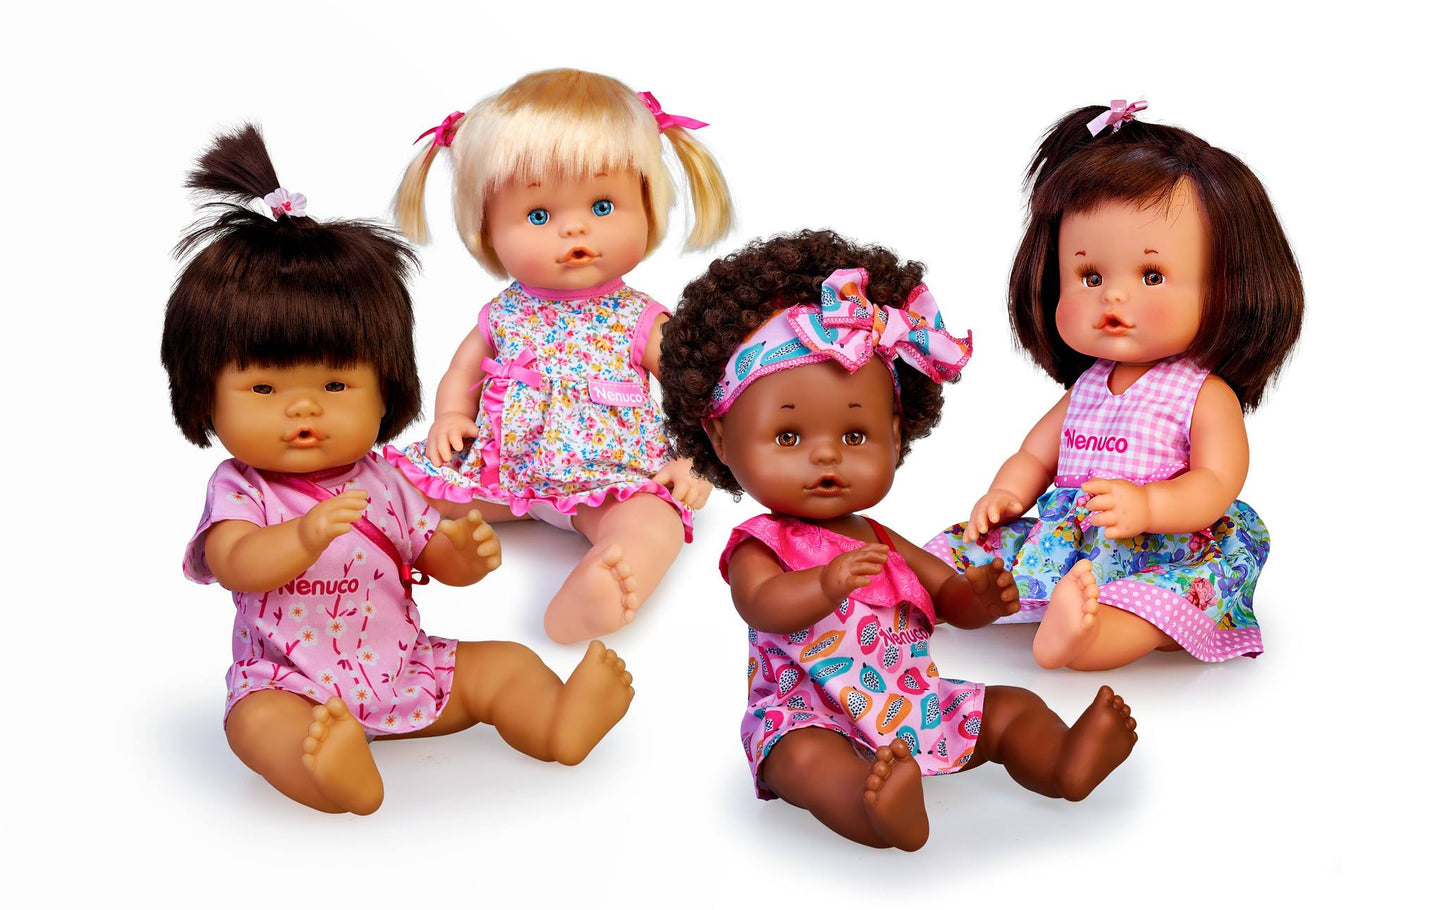 Nenucos of the World African Baby Doll - Dark Skin Tone with Brown Eyes, 12" Doll